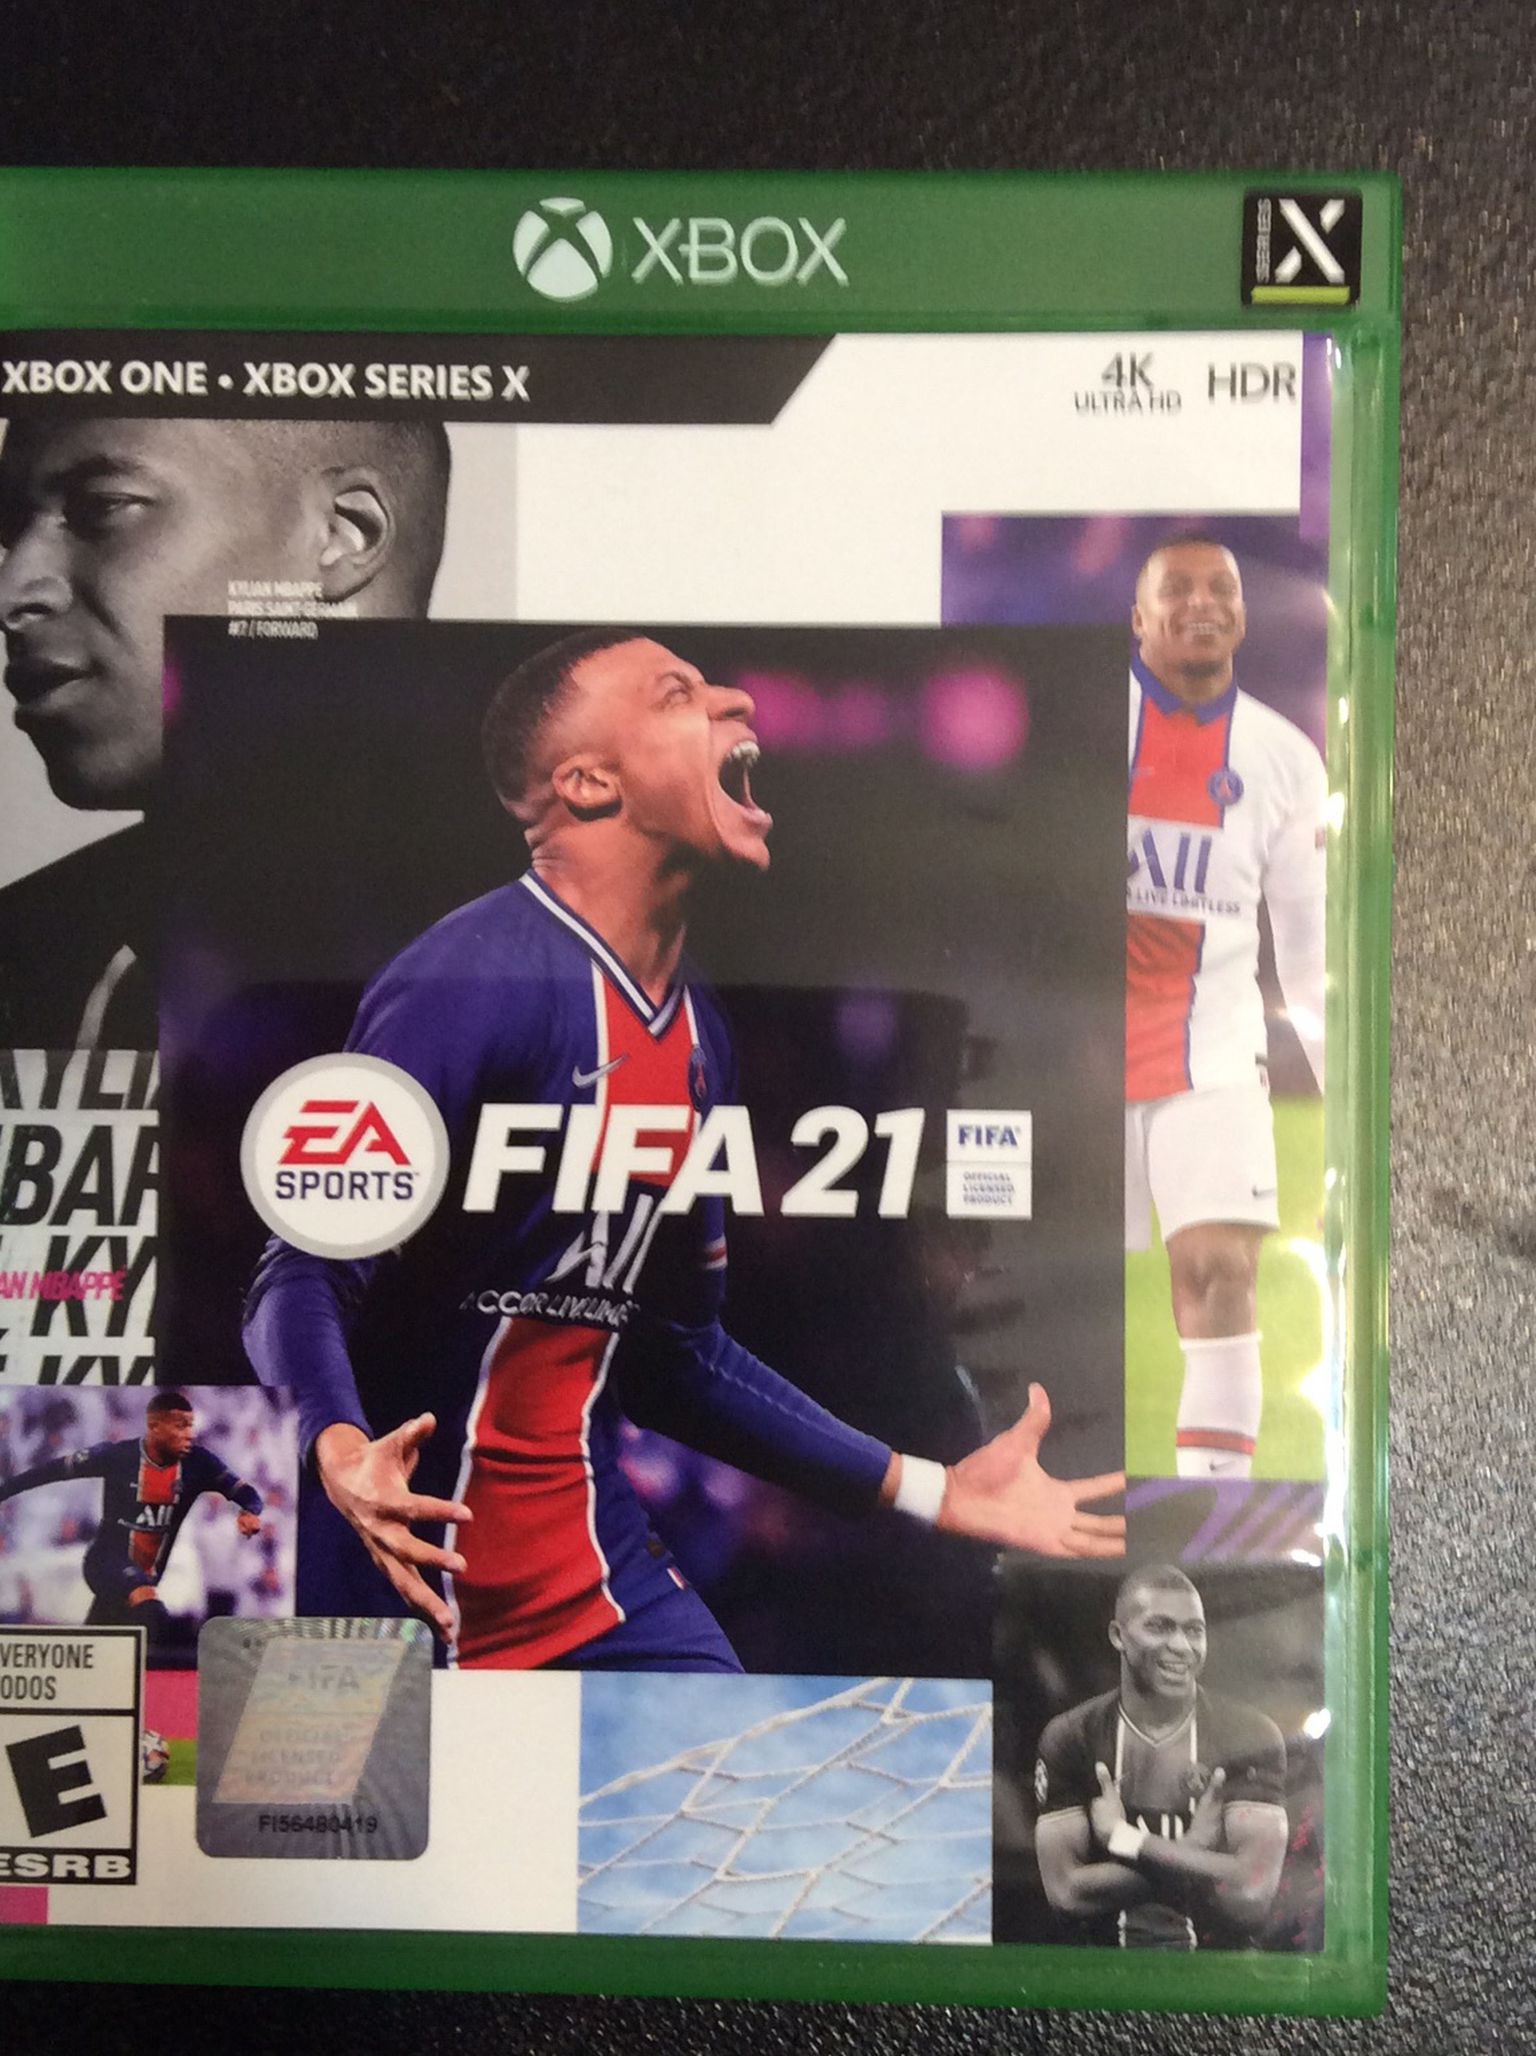 NEW FIFA21 Edition - OPEN BOX - $30 For Xbox One and Xbox Series X